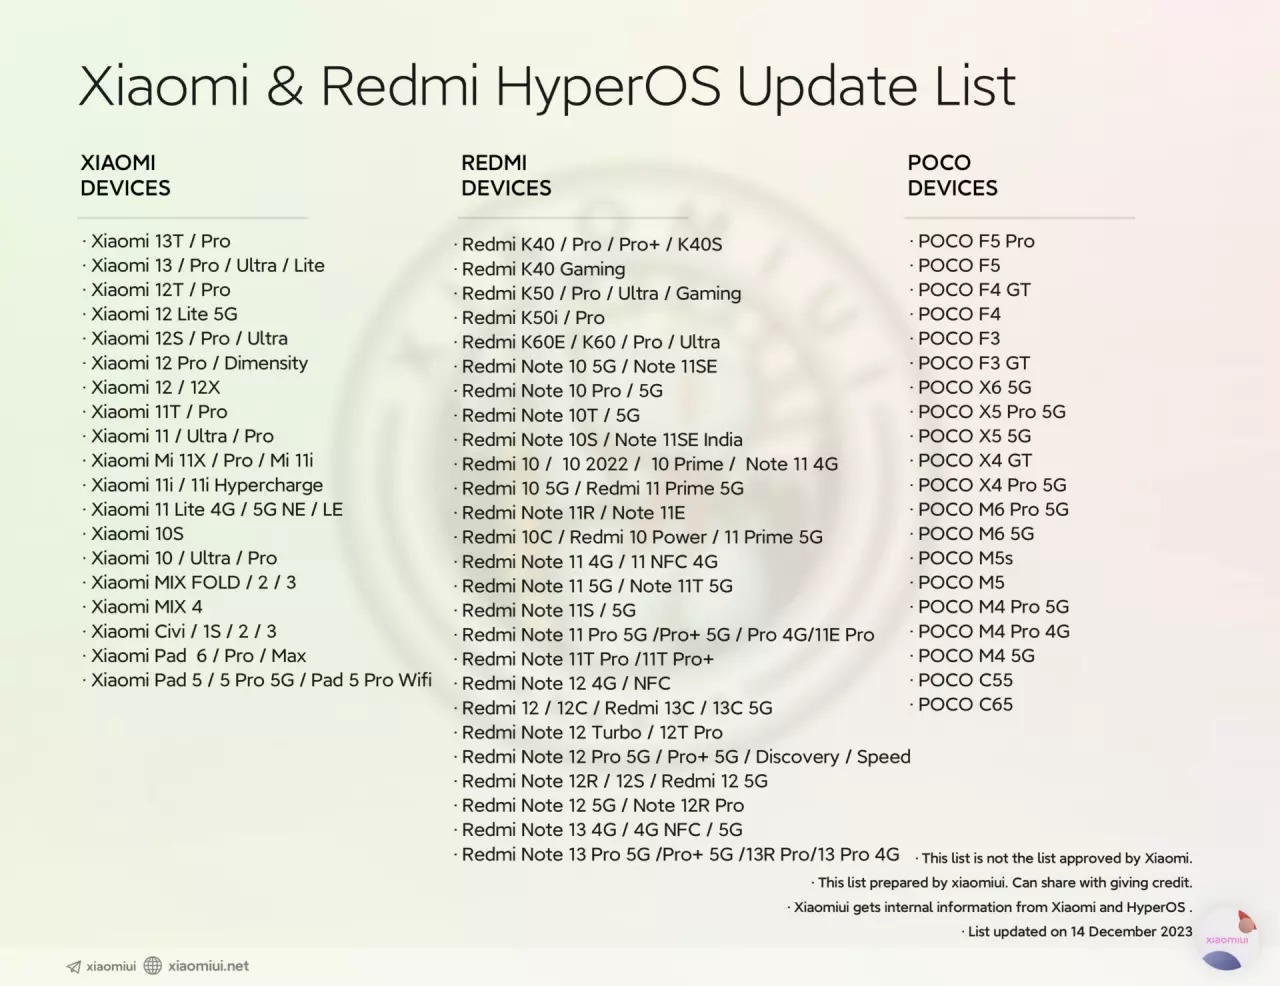 HyperOS Eligible Devices List